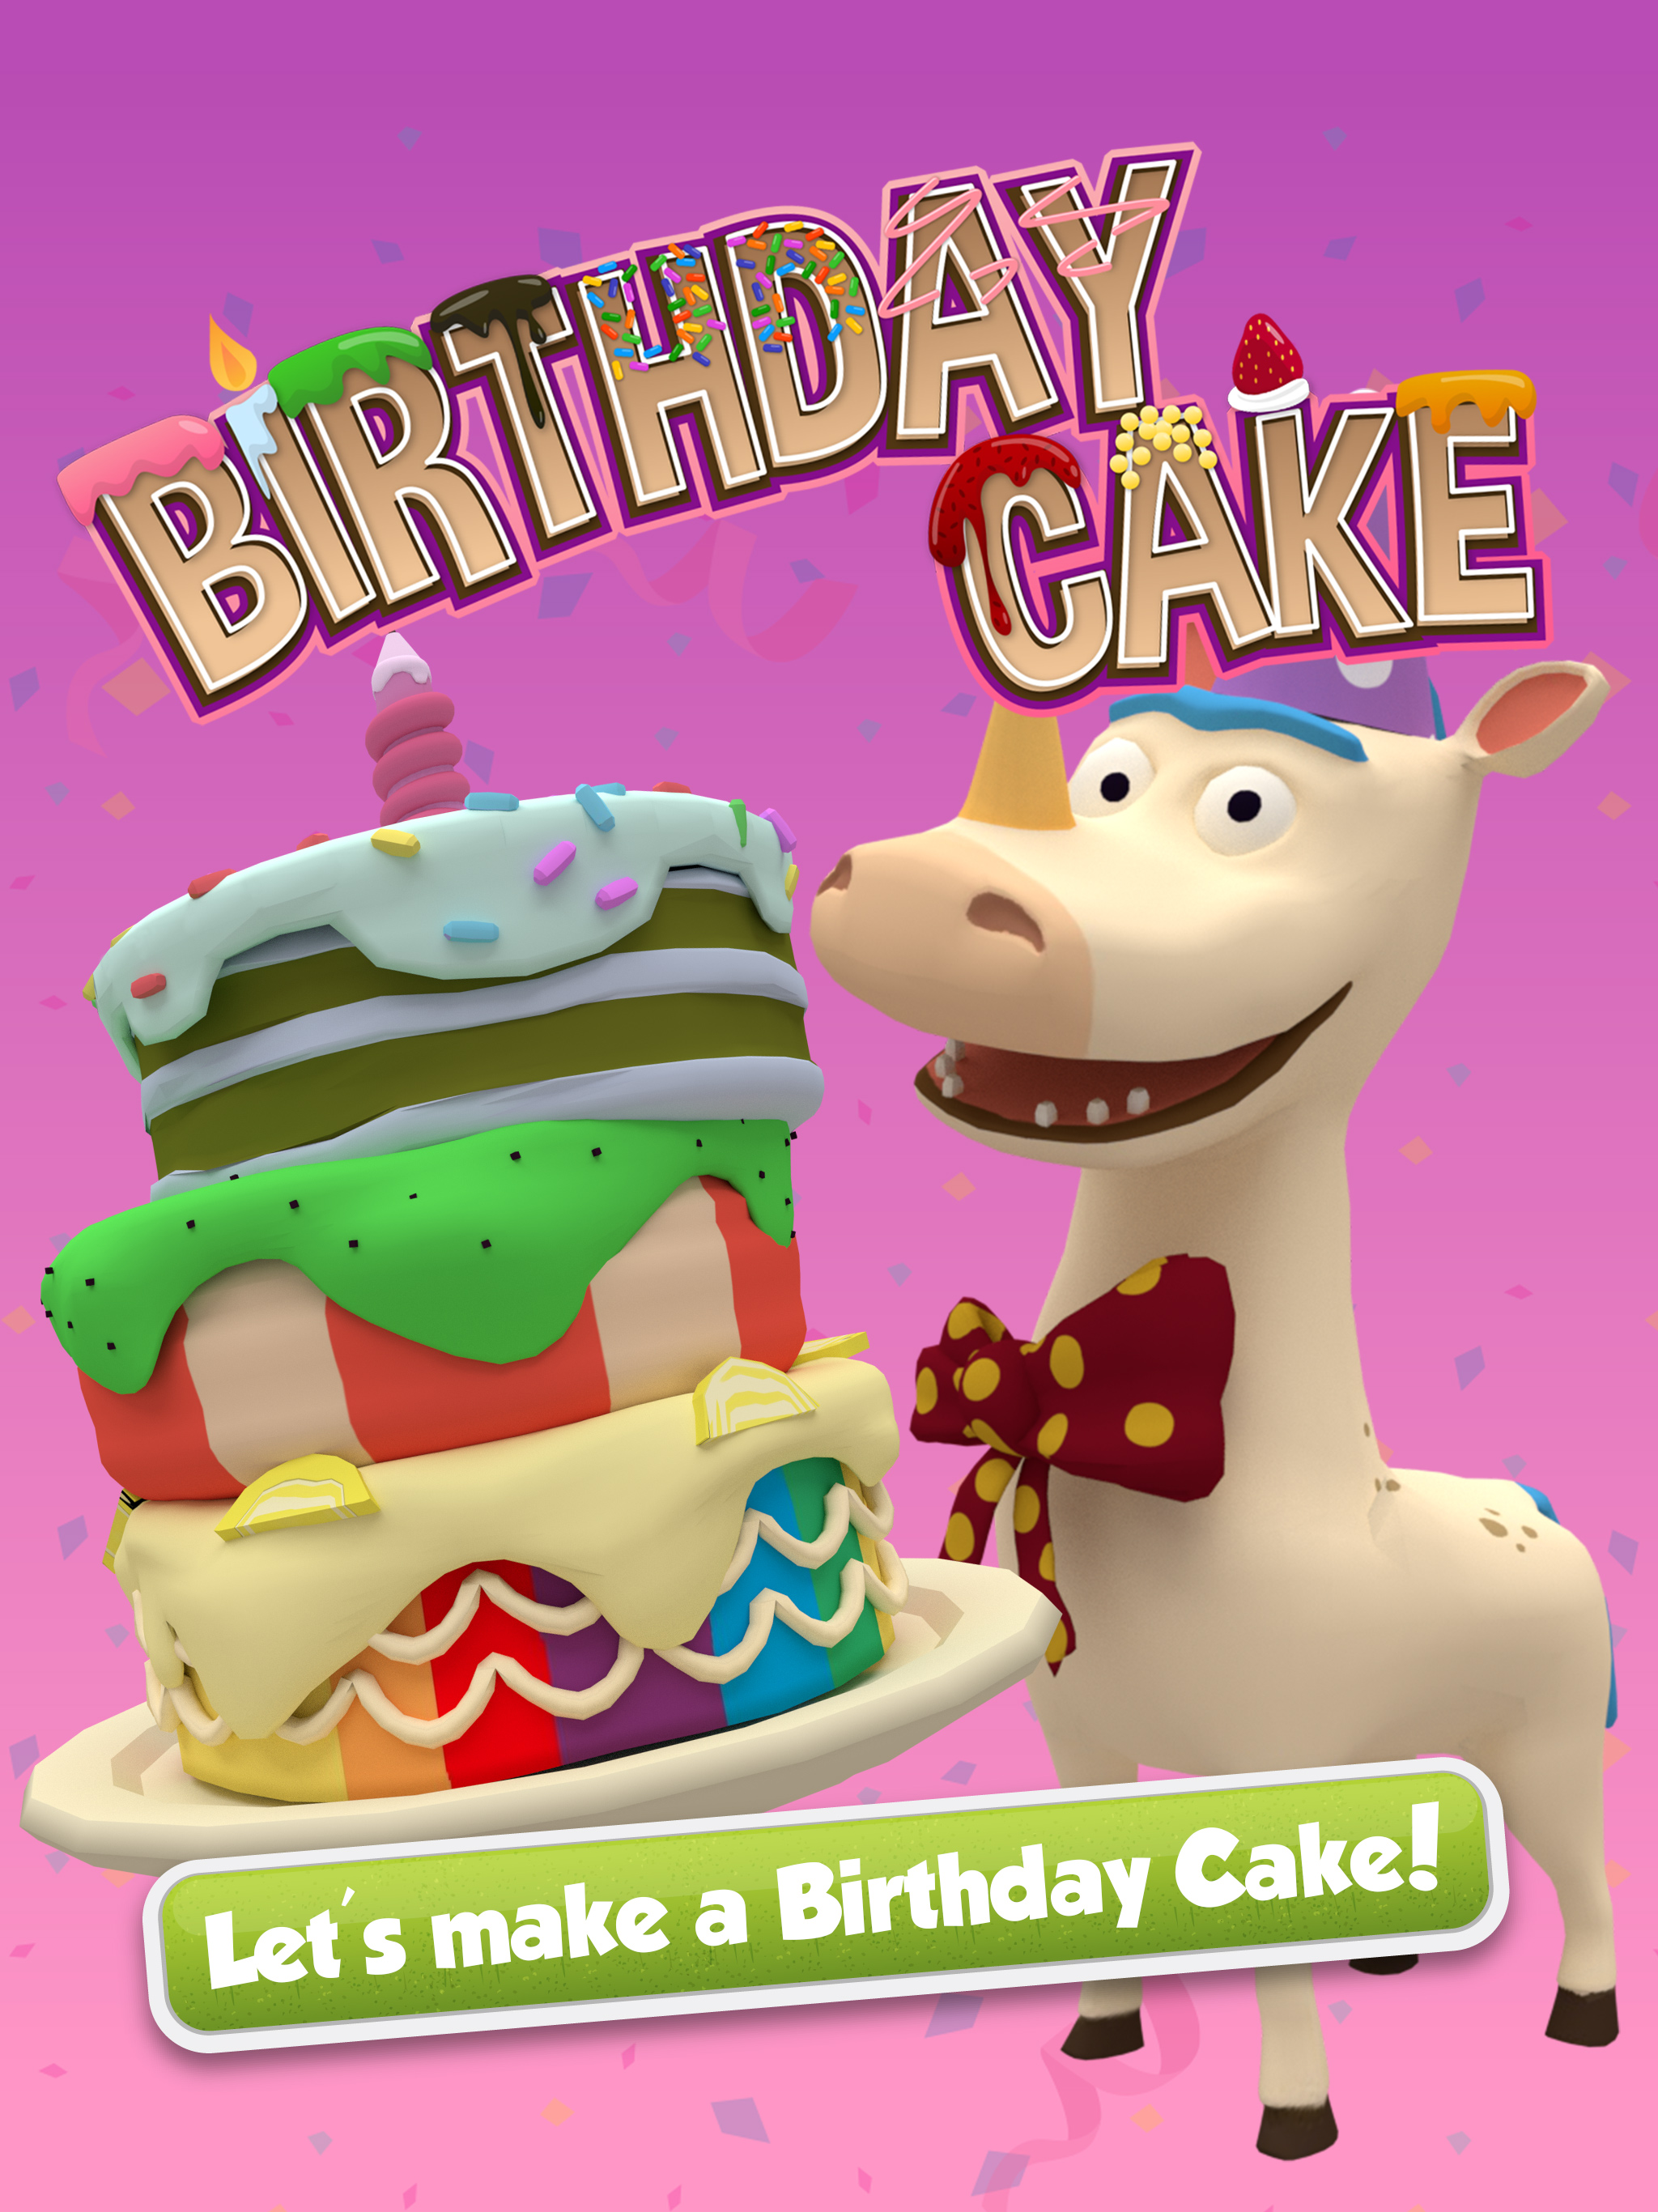 Details more than 74 potty birthday cake latest - awesomeenglish.edu.vn